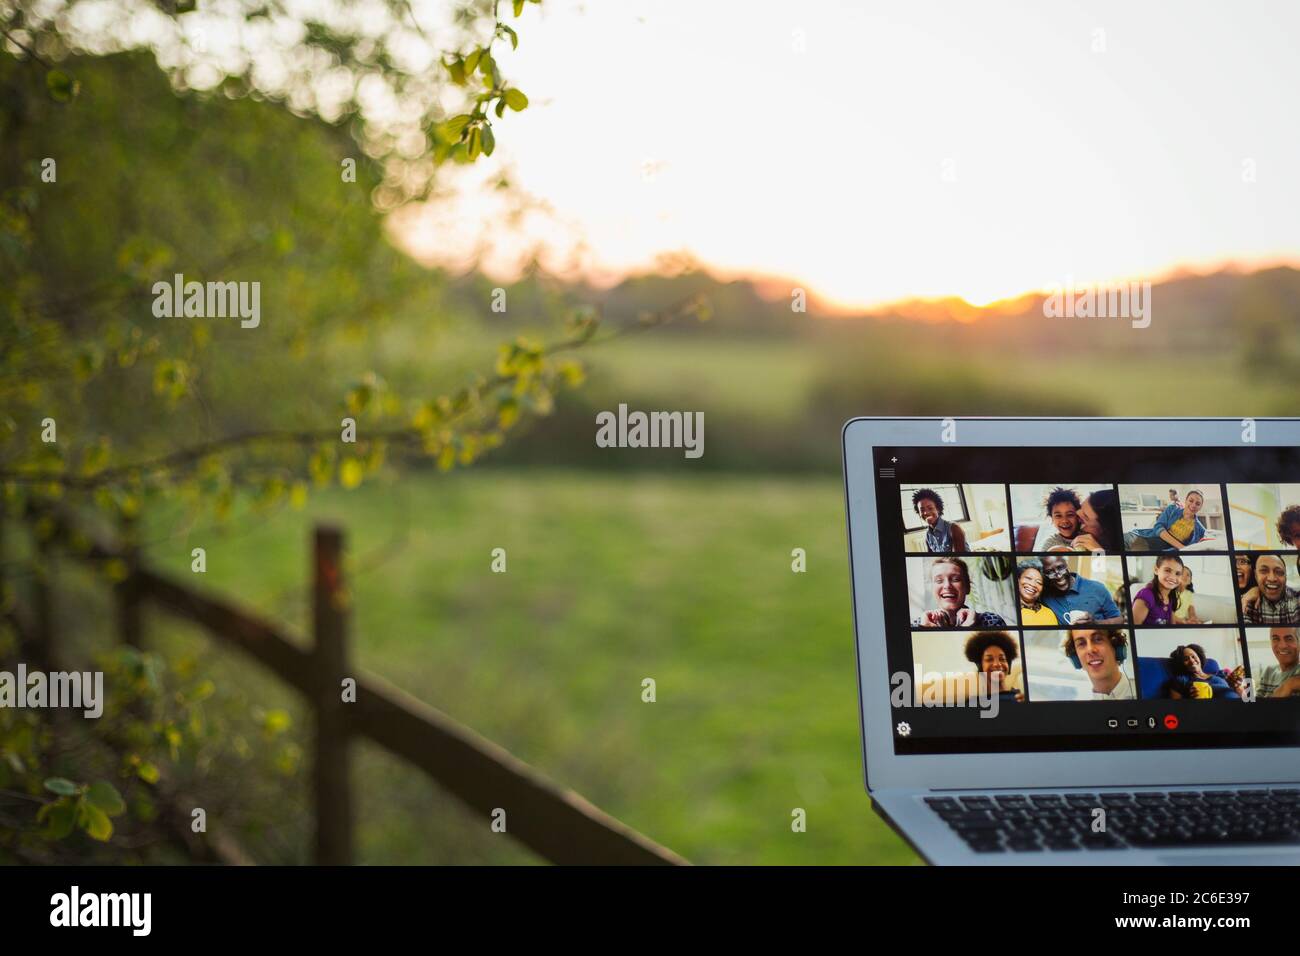 Friends video chatting on laptop screen on rural fence Stock Photo